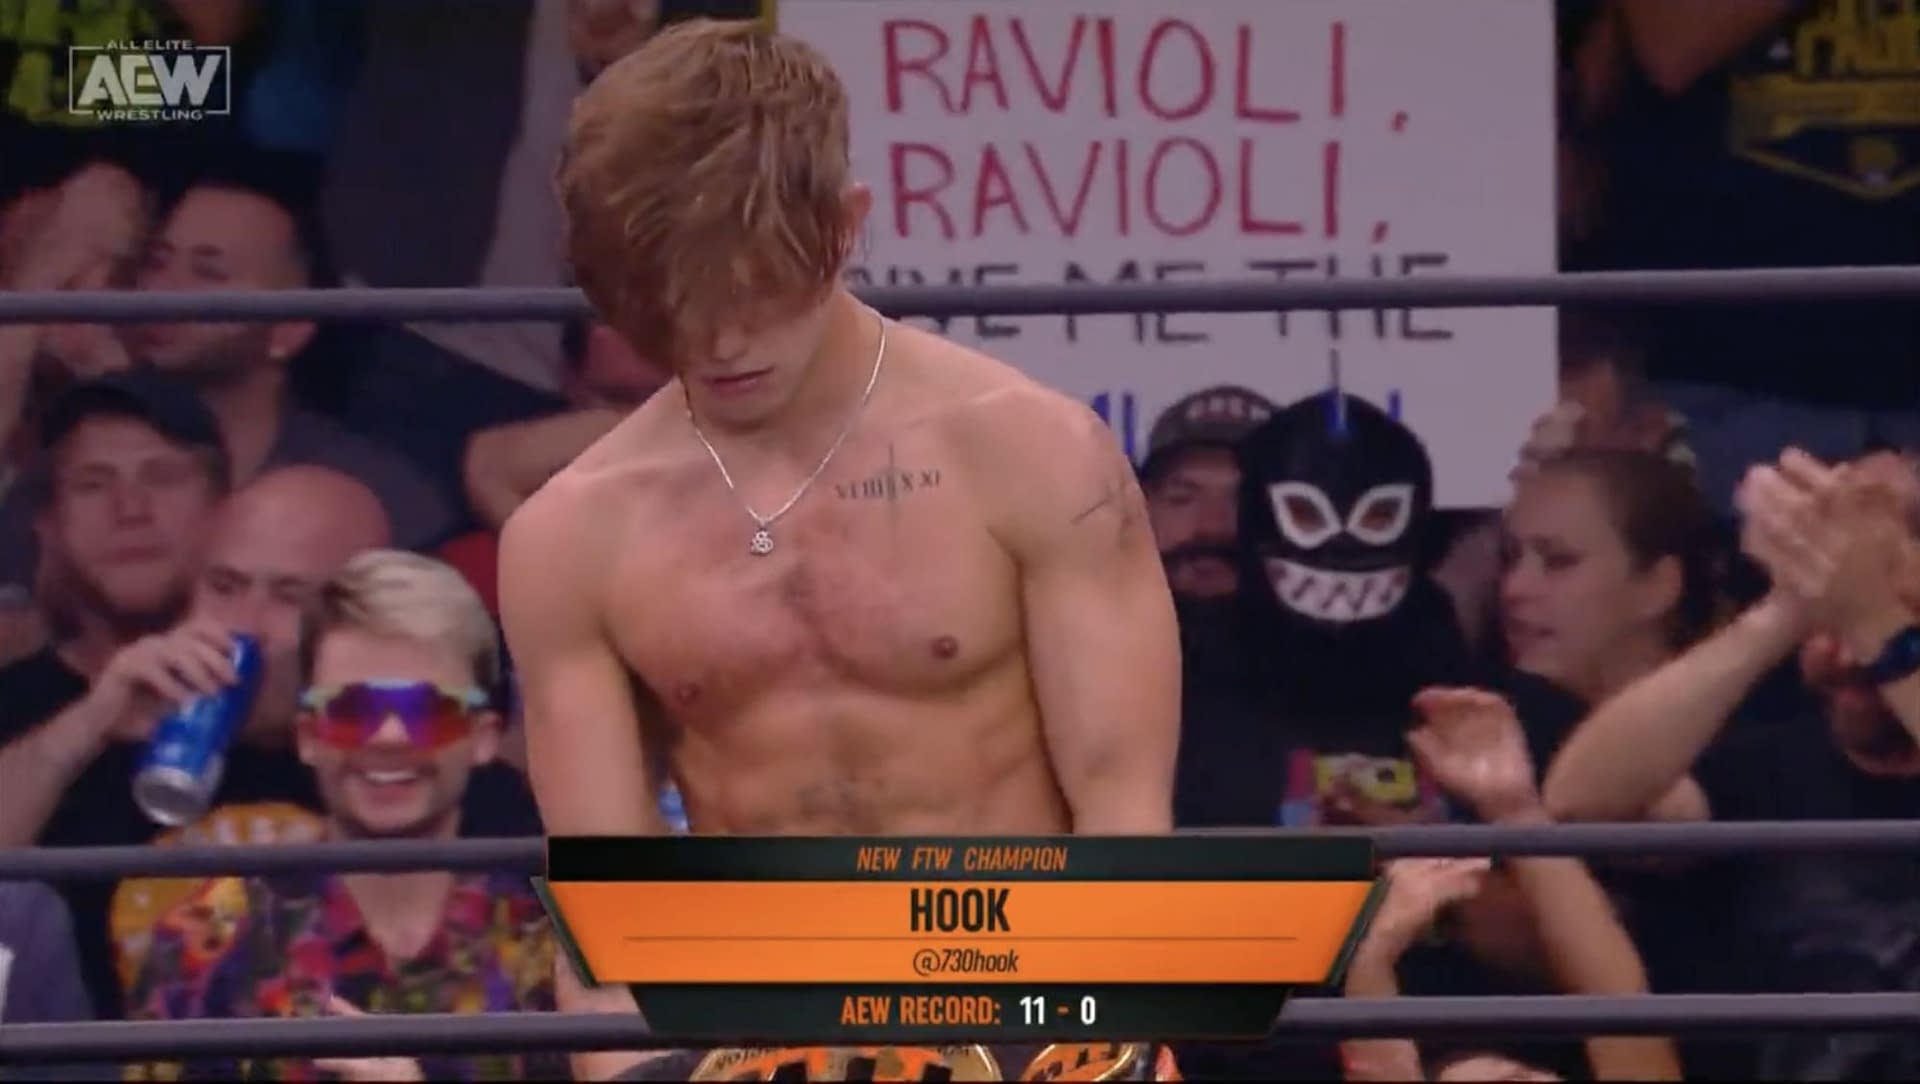 Hook wins FTW title at AEW All In Zero Hour - WON/F4W - WWE news